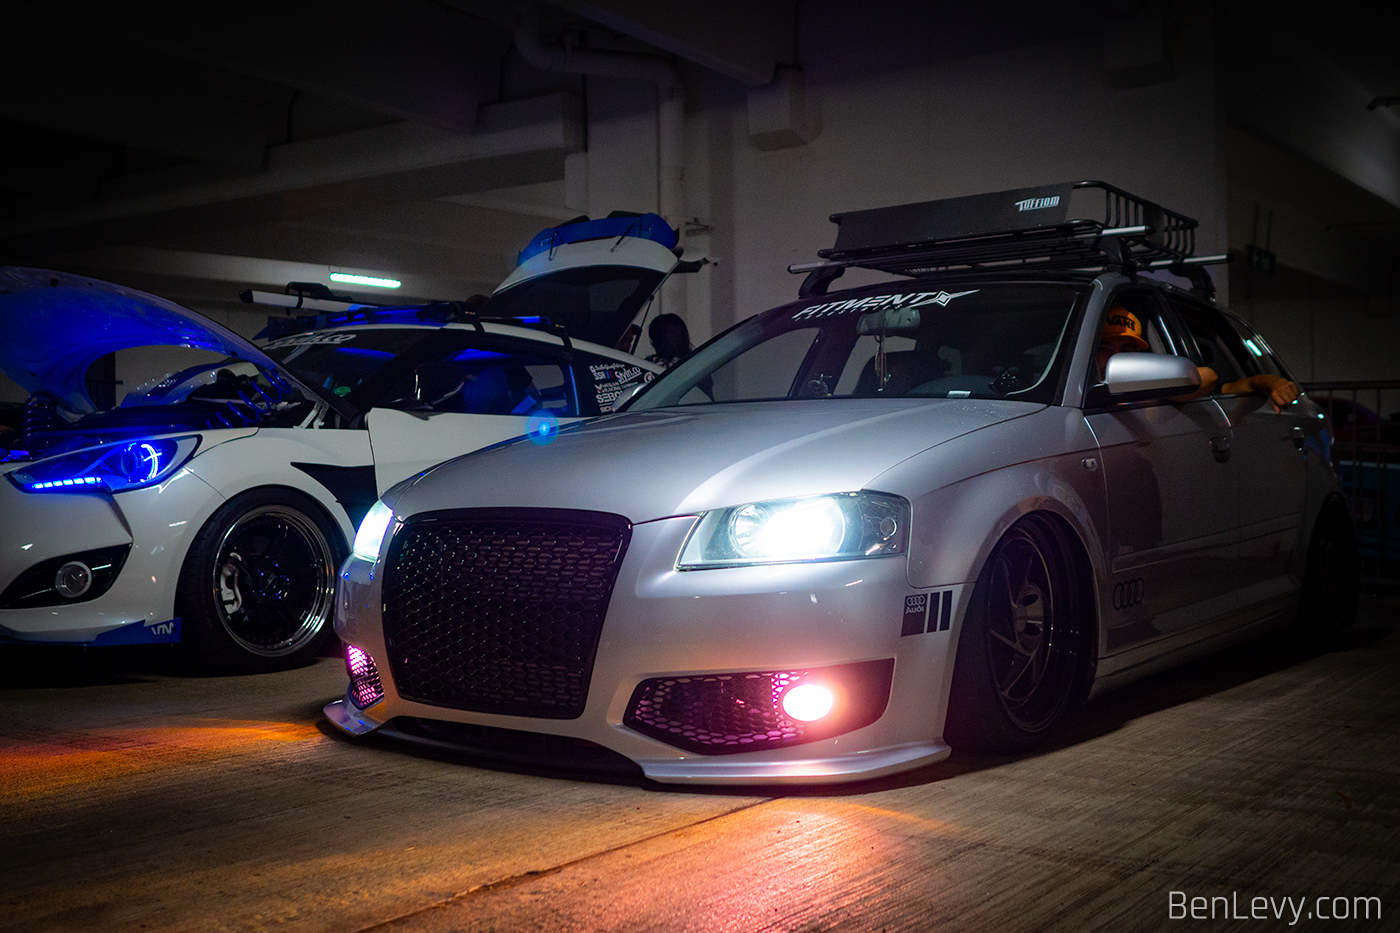 Bagged Silver Audi A3 in Parking Garage